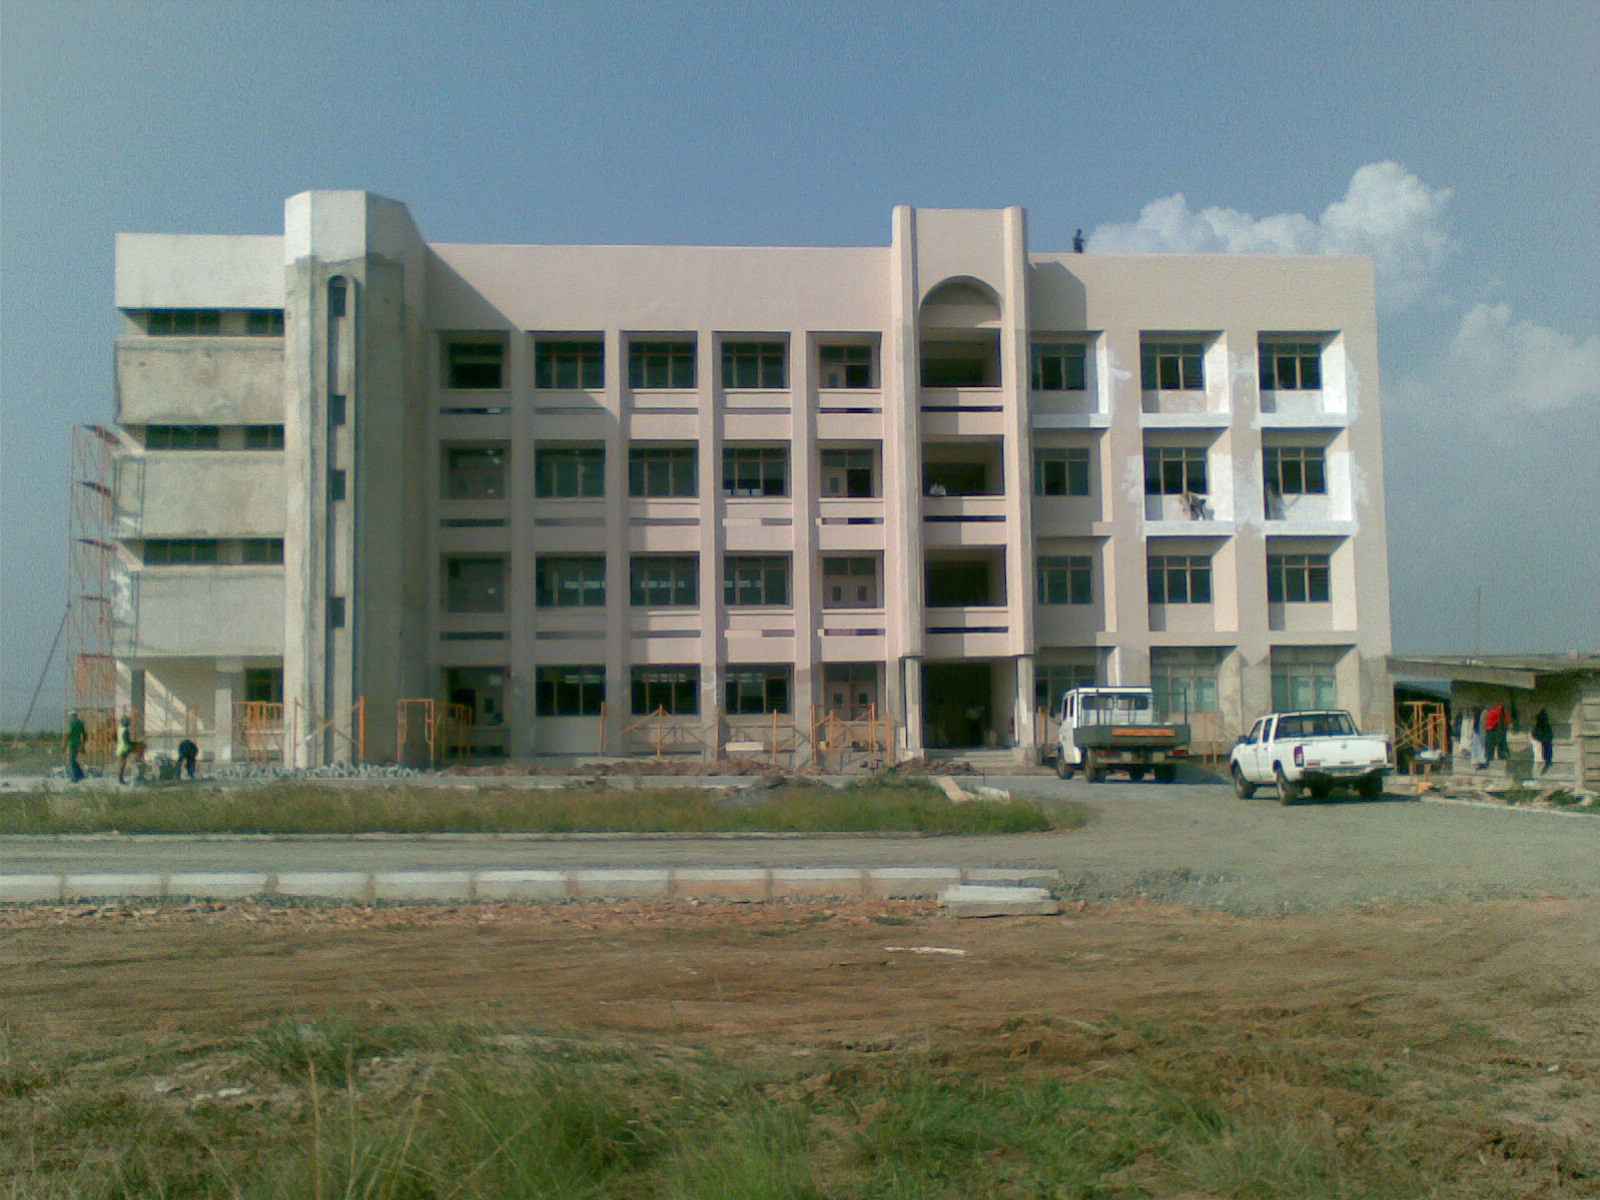 Central Universtiy College by the Best Engineering Consultant in Ghana